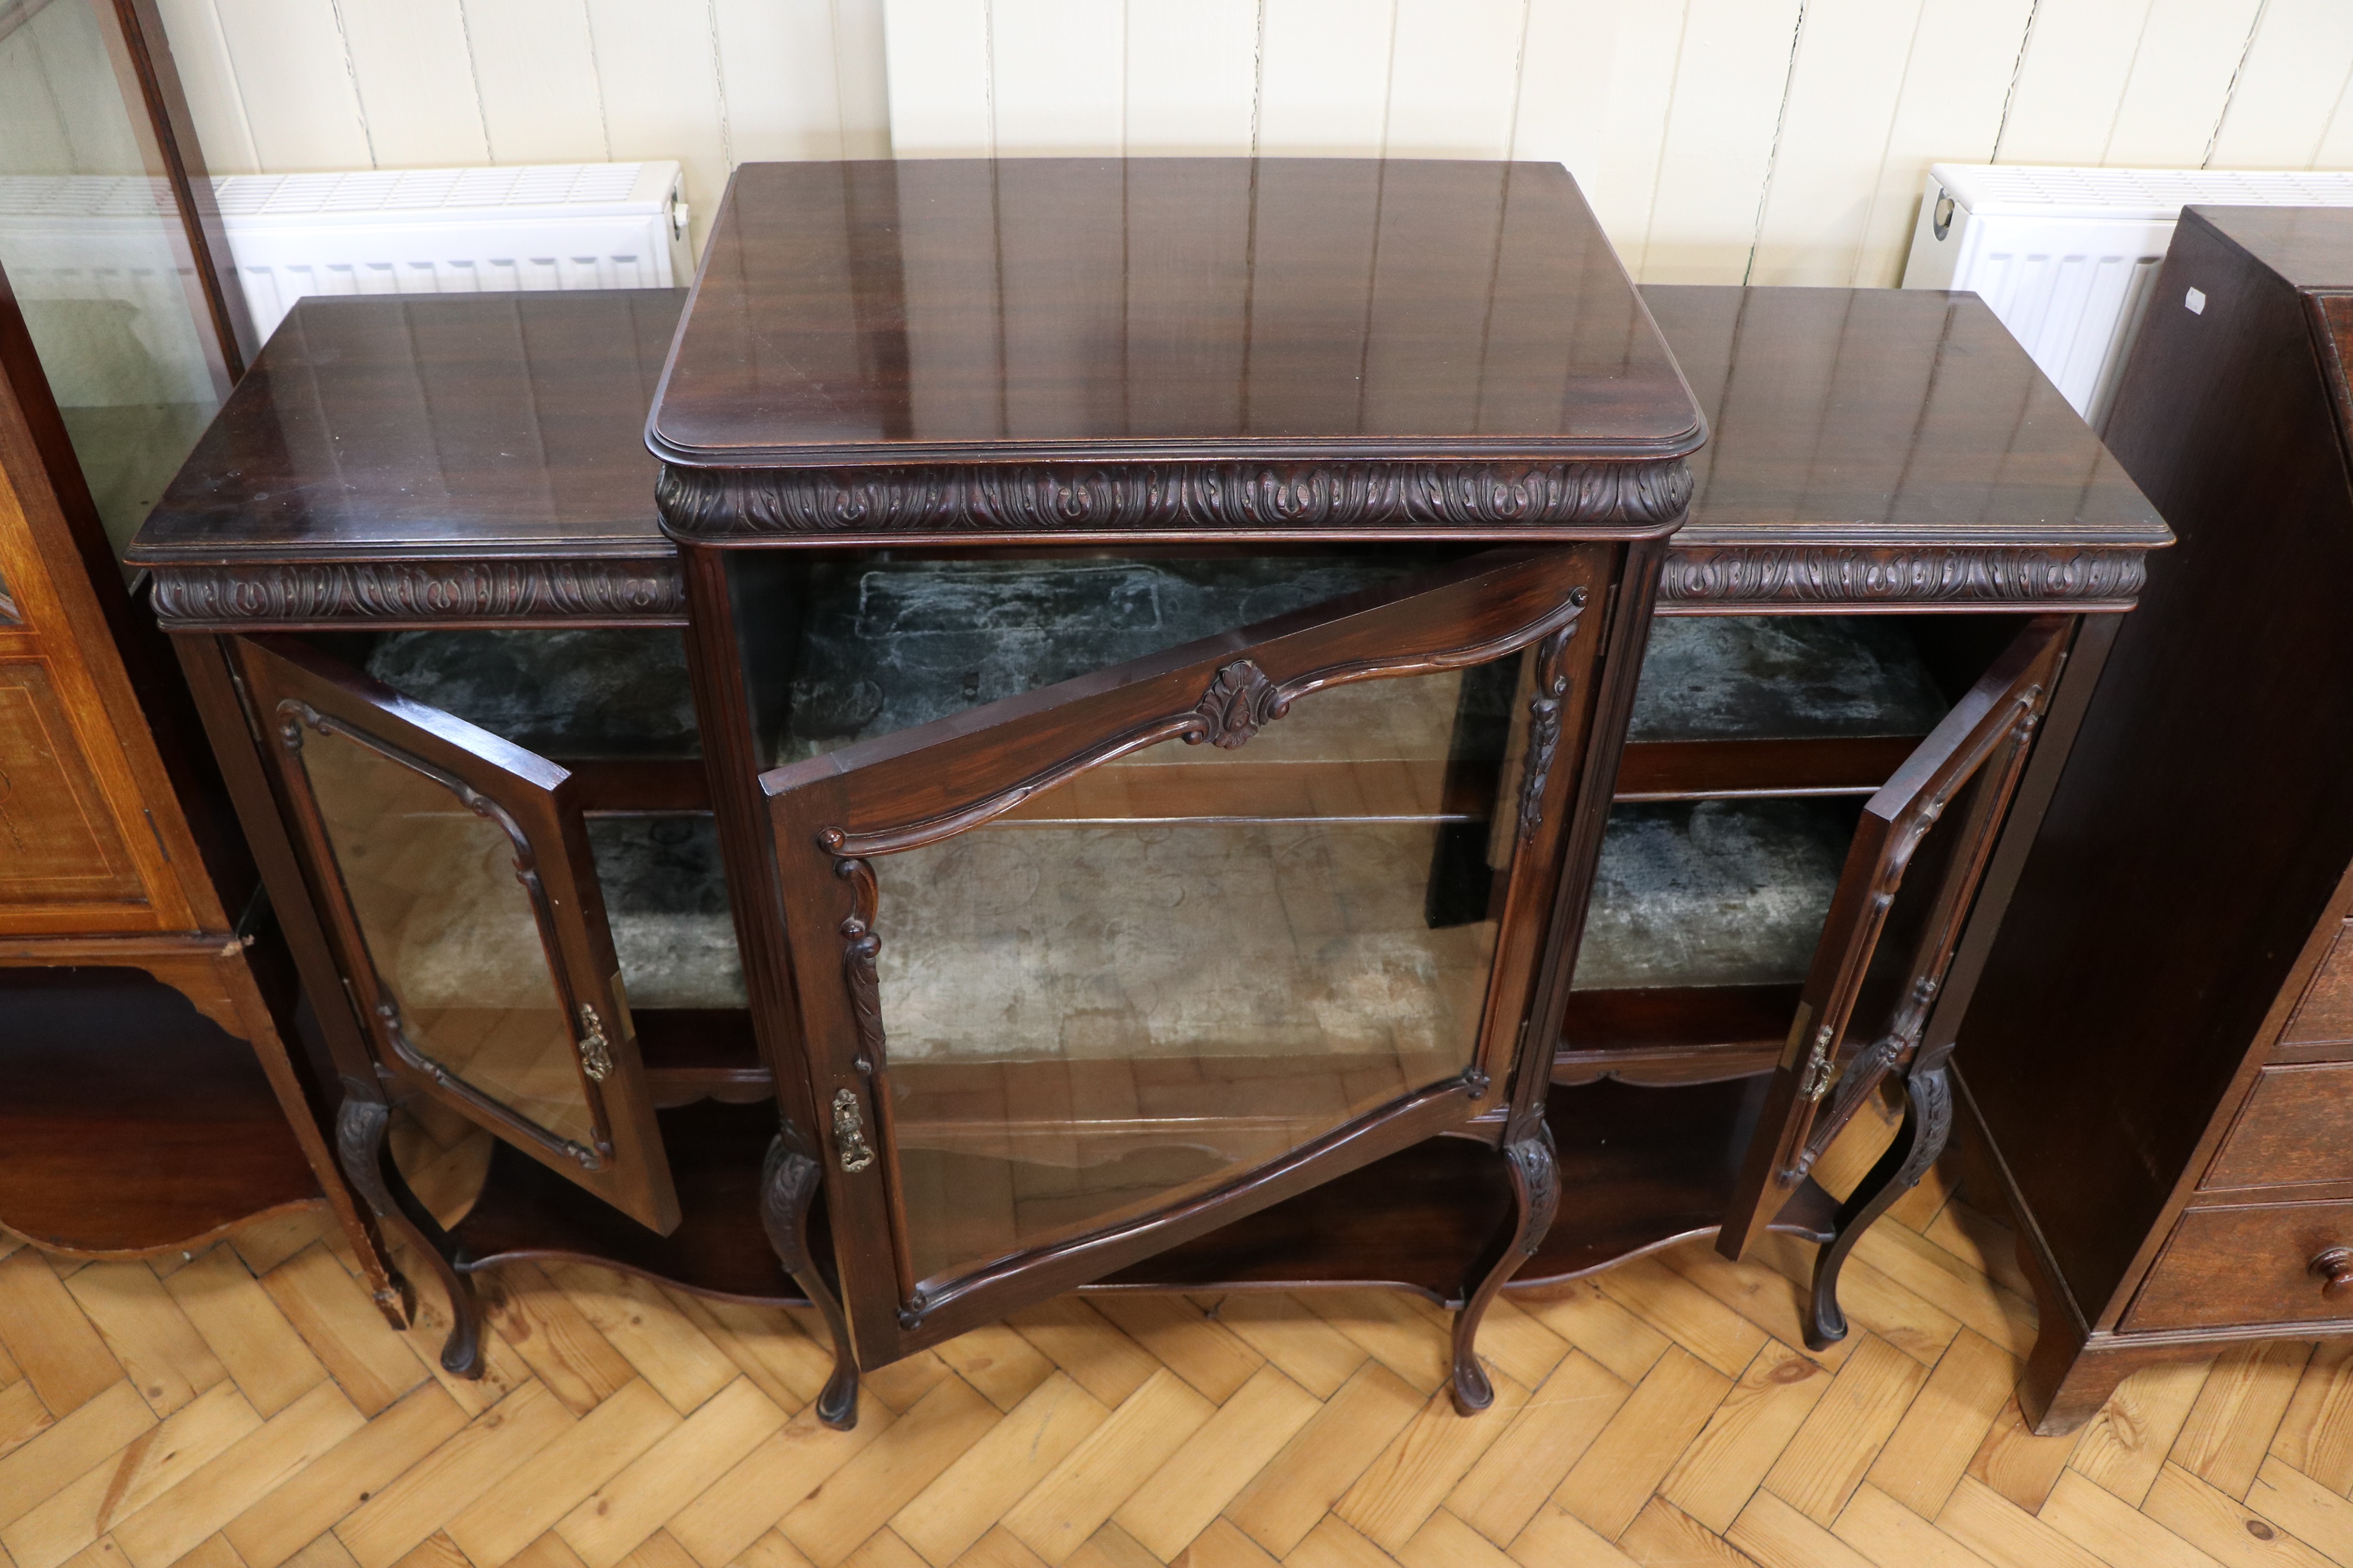 A Victorian Louis-style glazed mahogany break-front display cabinet, 138 cm x 43 cm x 106 cm - Image 2 of 5